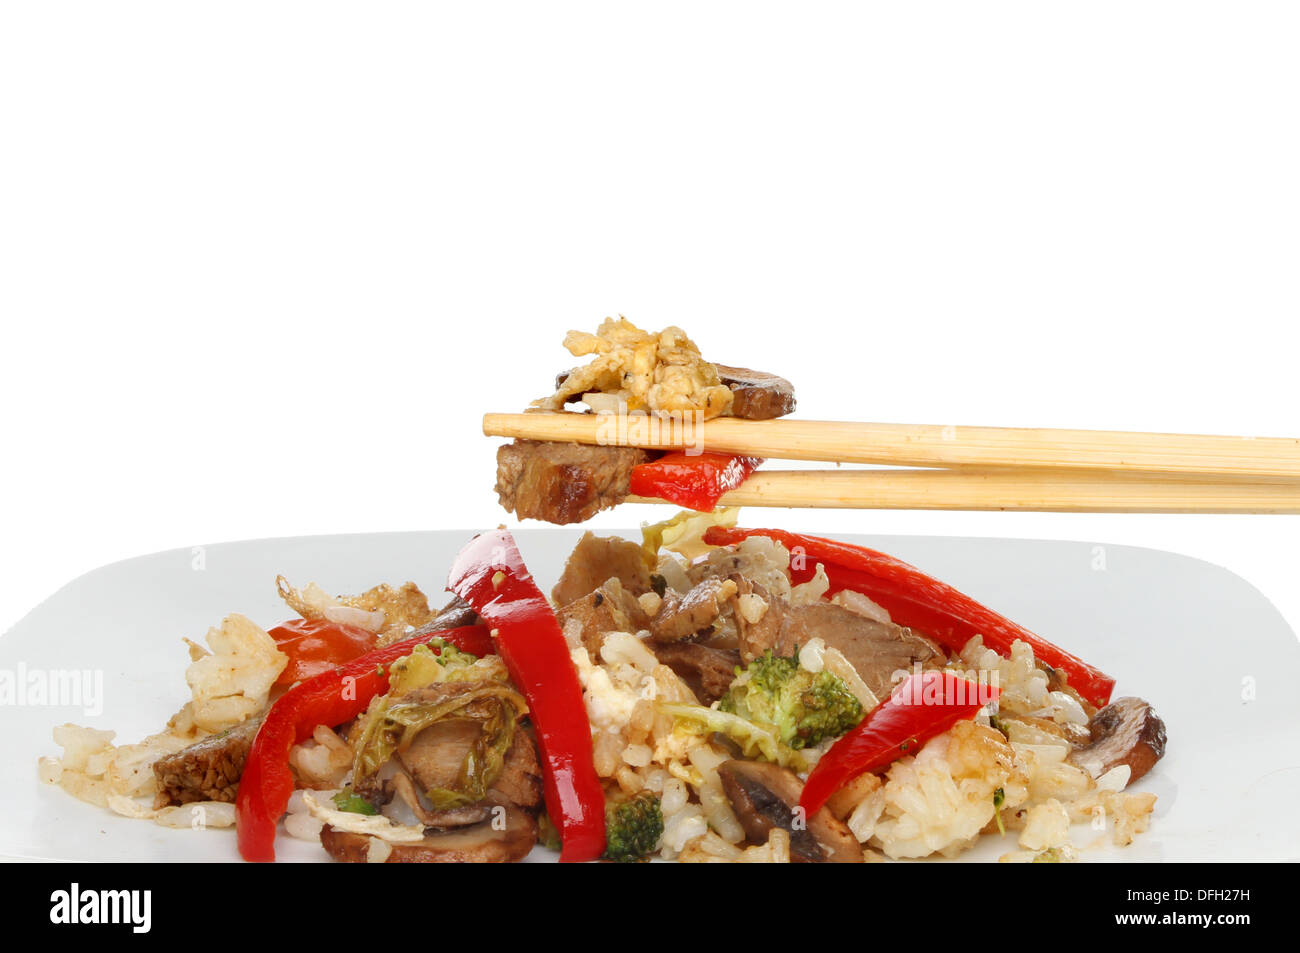 Beef and vegetable stir fry with chopsticks above a plate against a white background Stock Photo